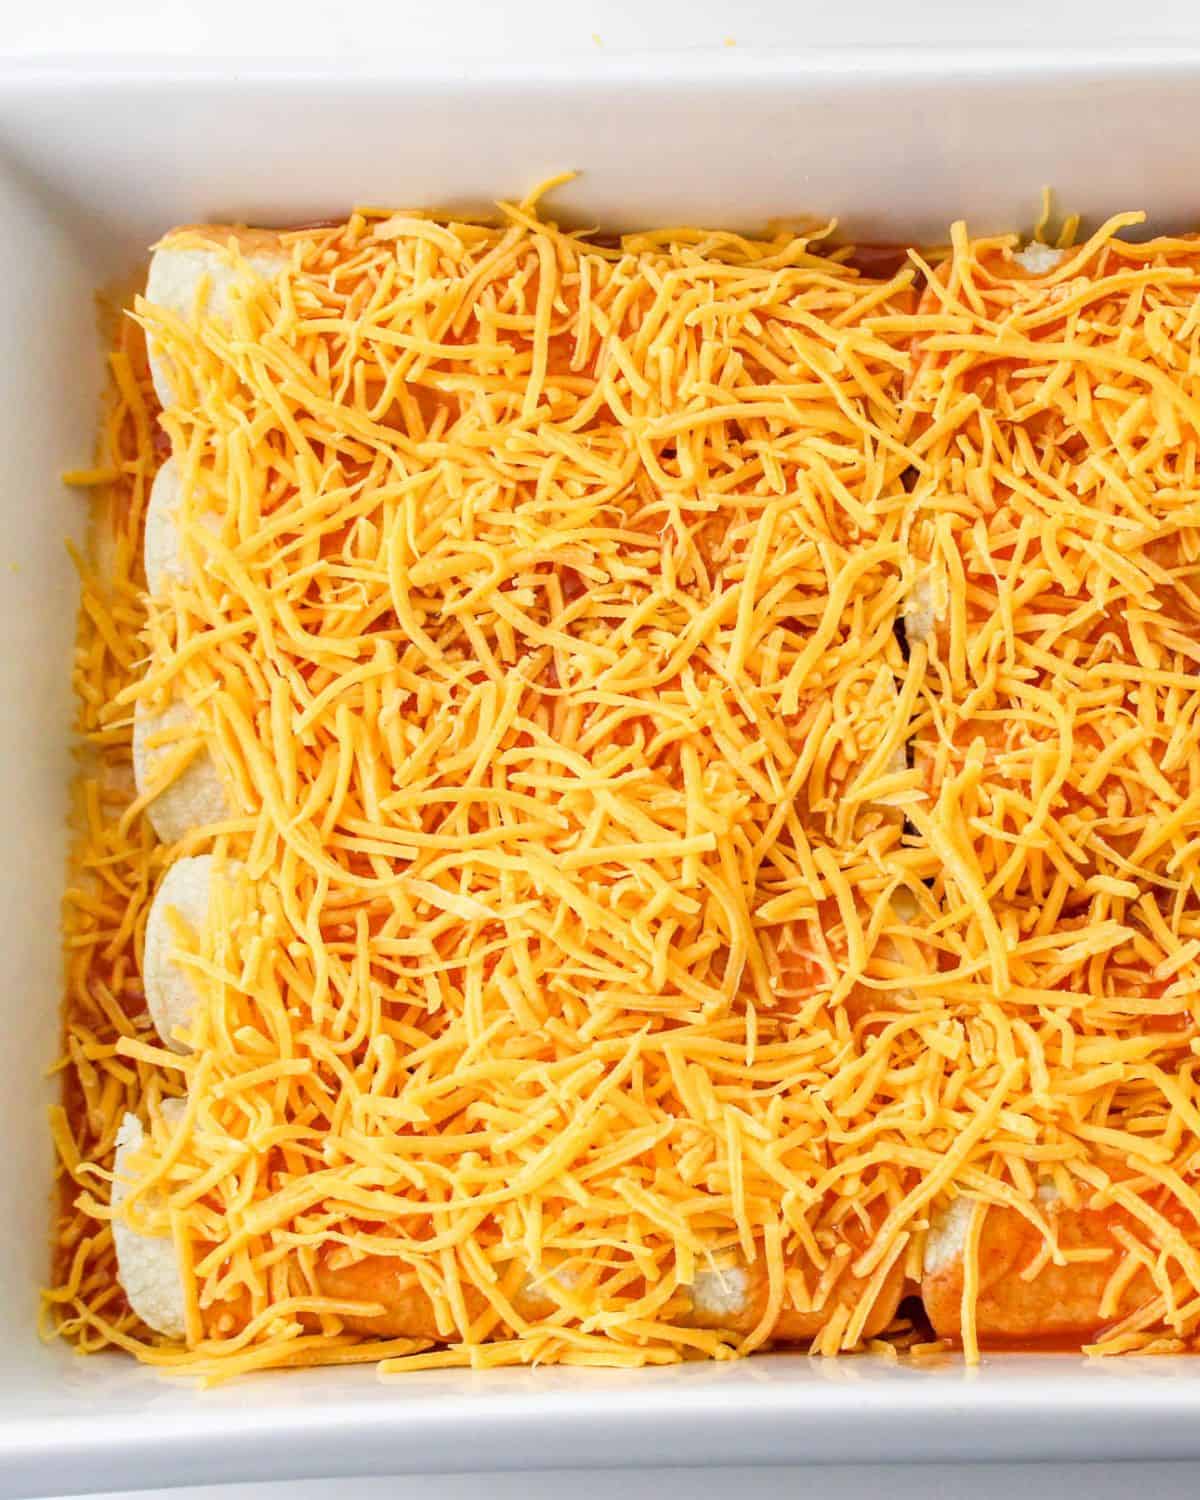 A casserole with beef enchiladas in corn tortillas topped with shredded cheese.